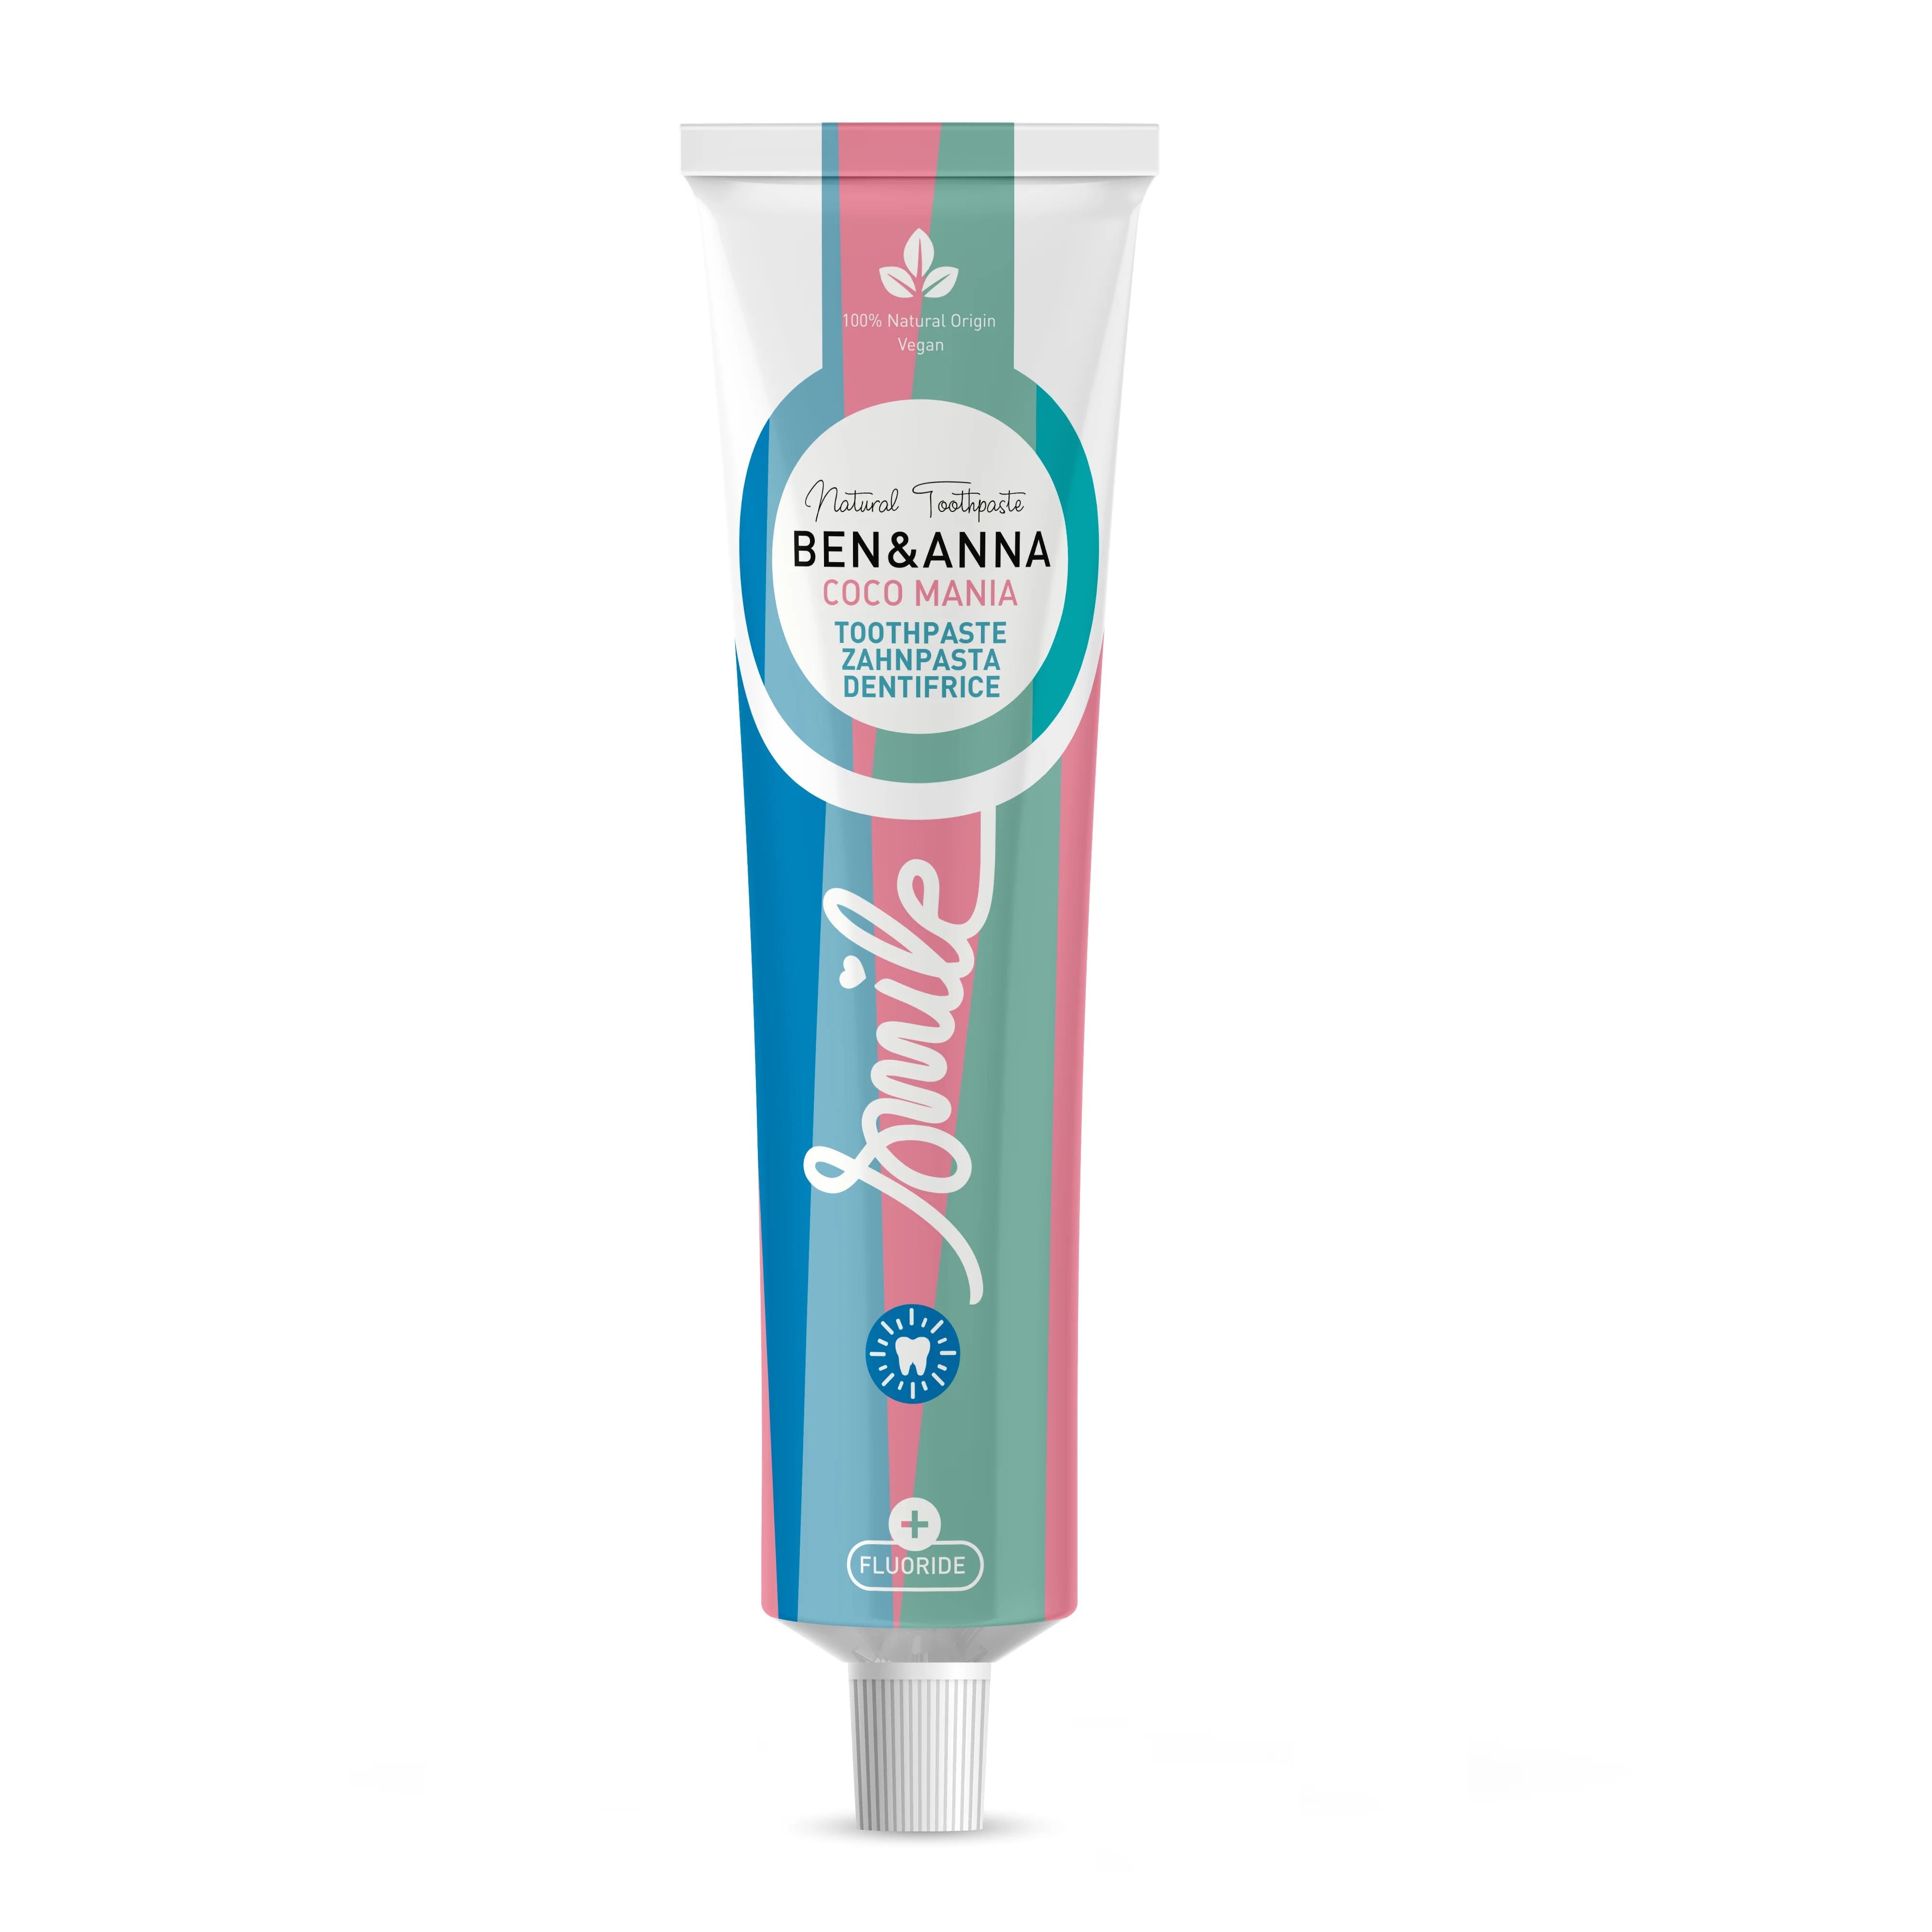 Toothpaste tube - Coco mania with fluoride